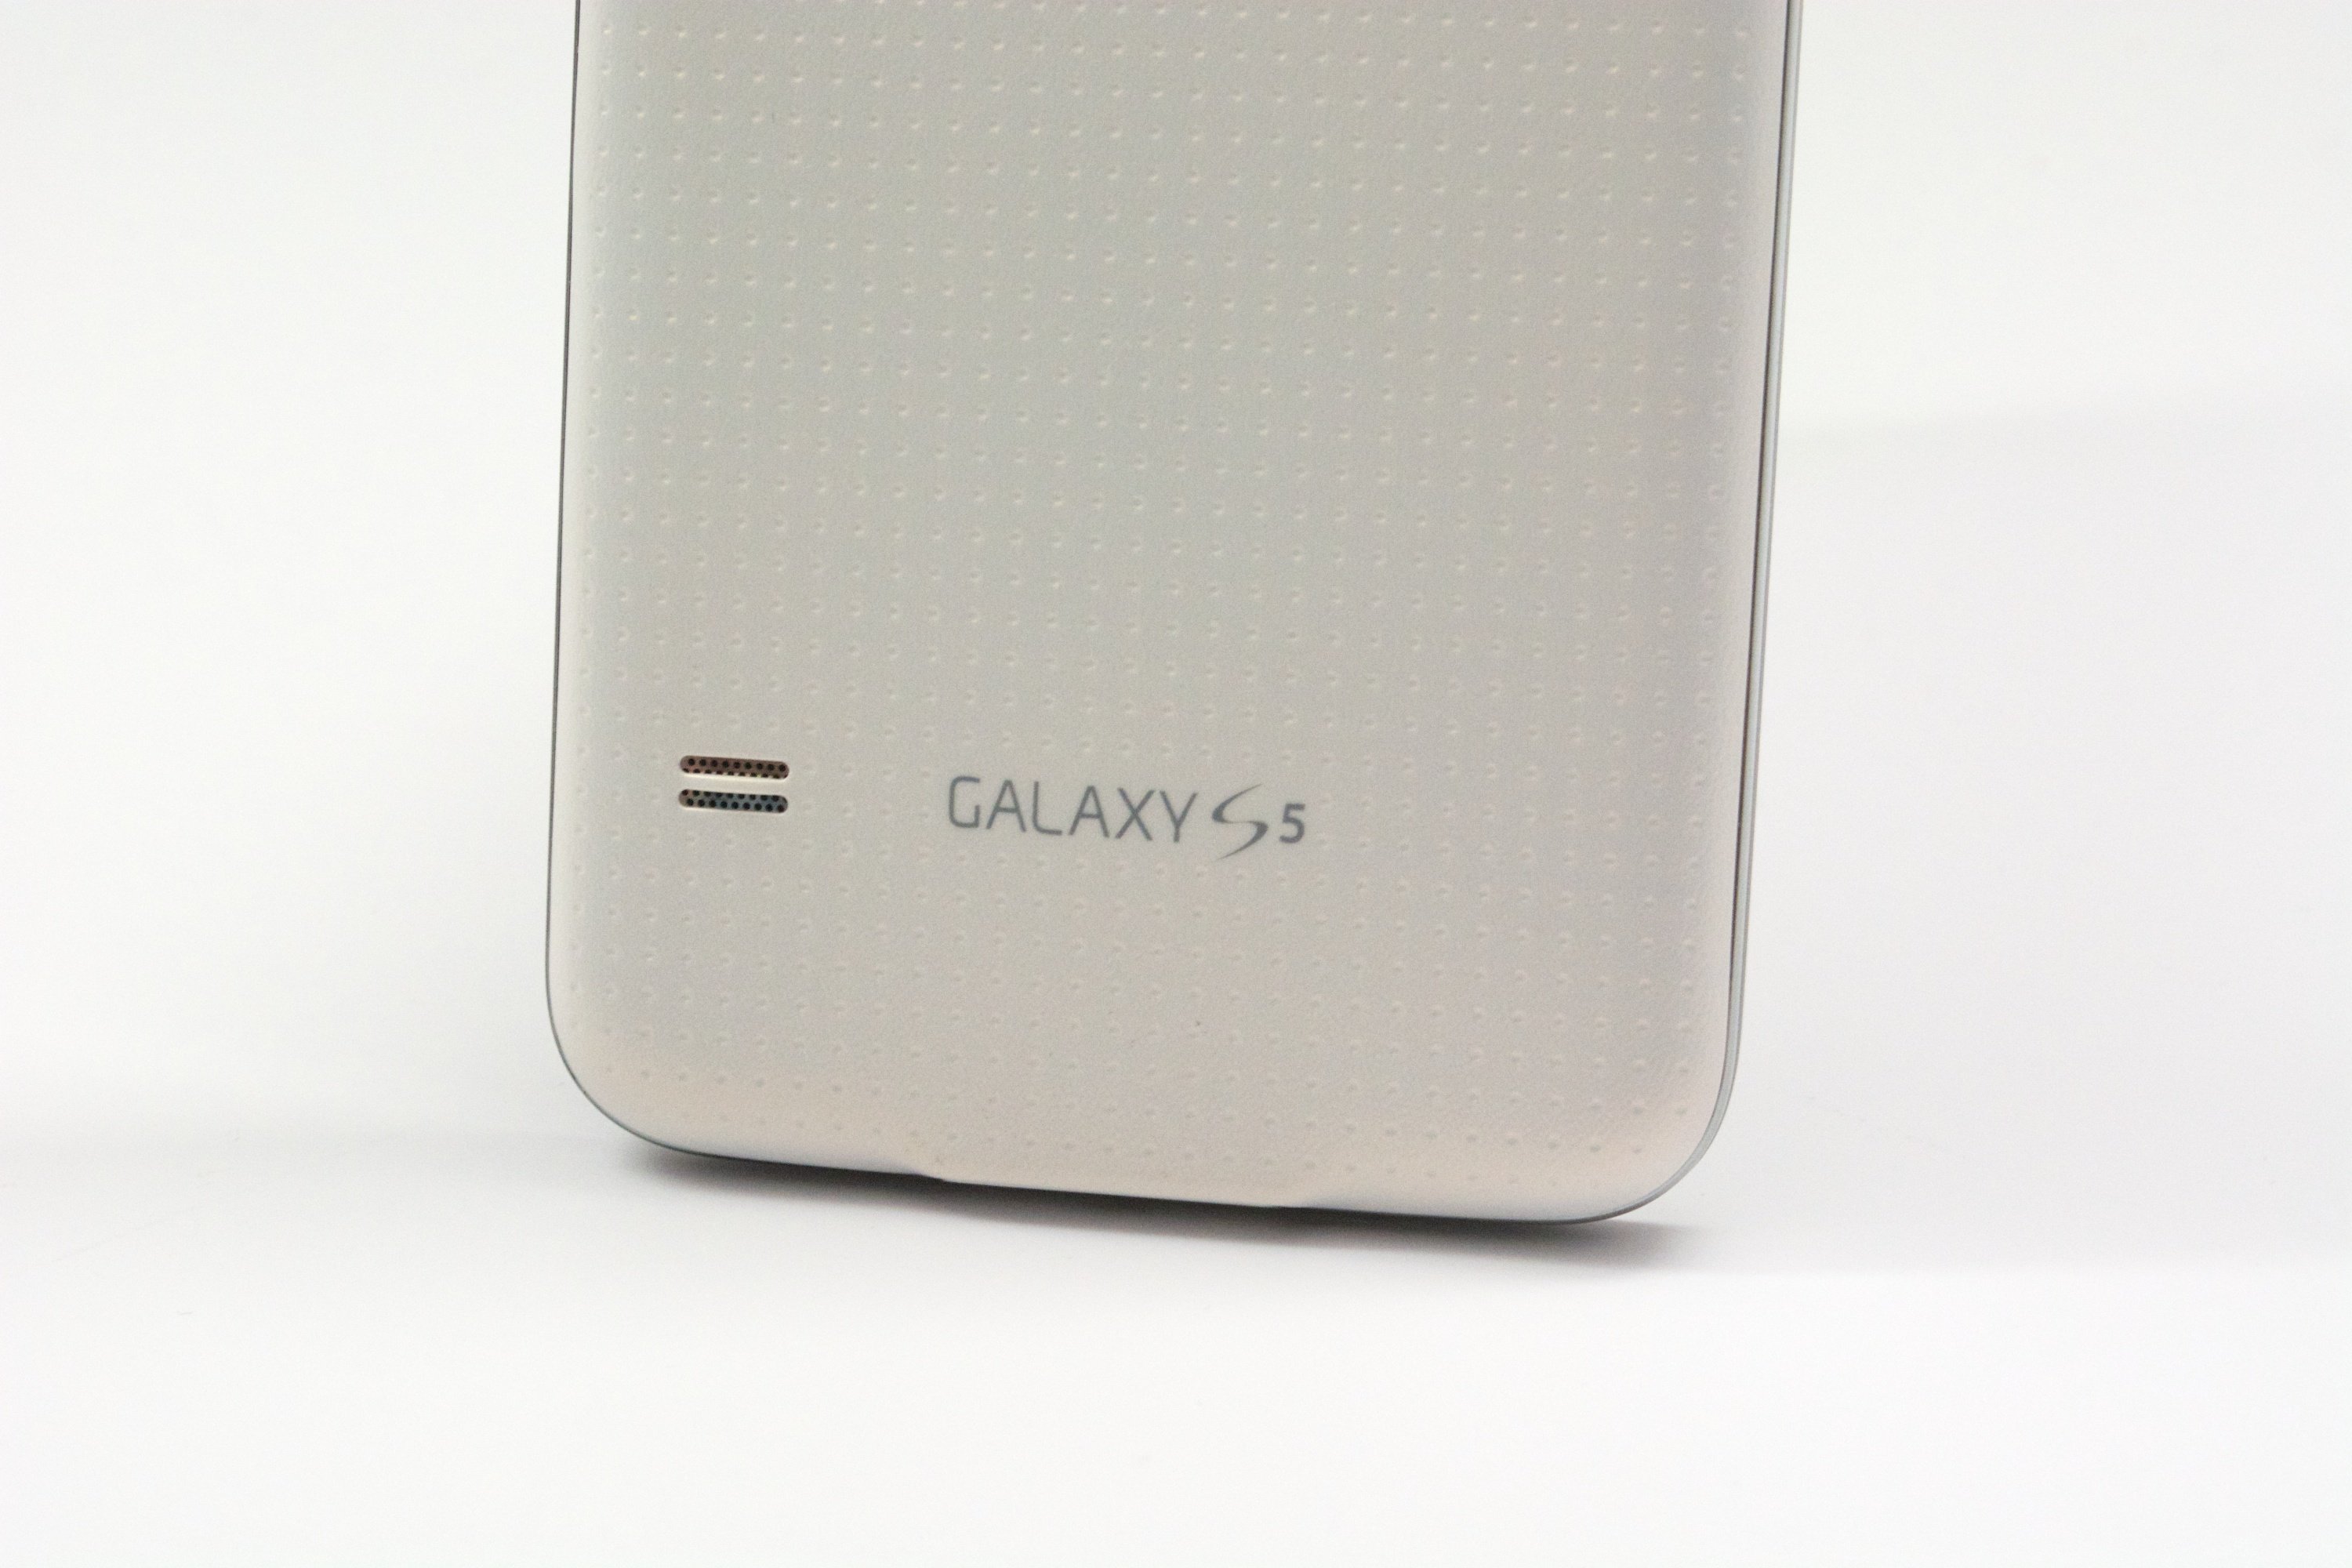 The Galaxy S5 design includes a soft touch dimpled back.